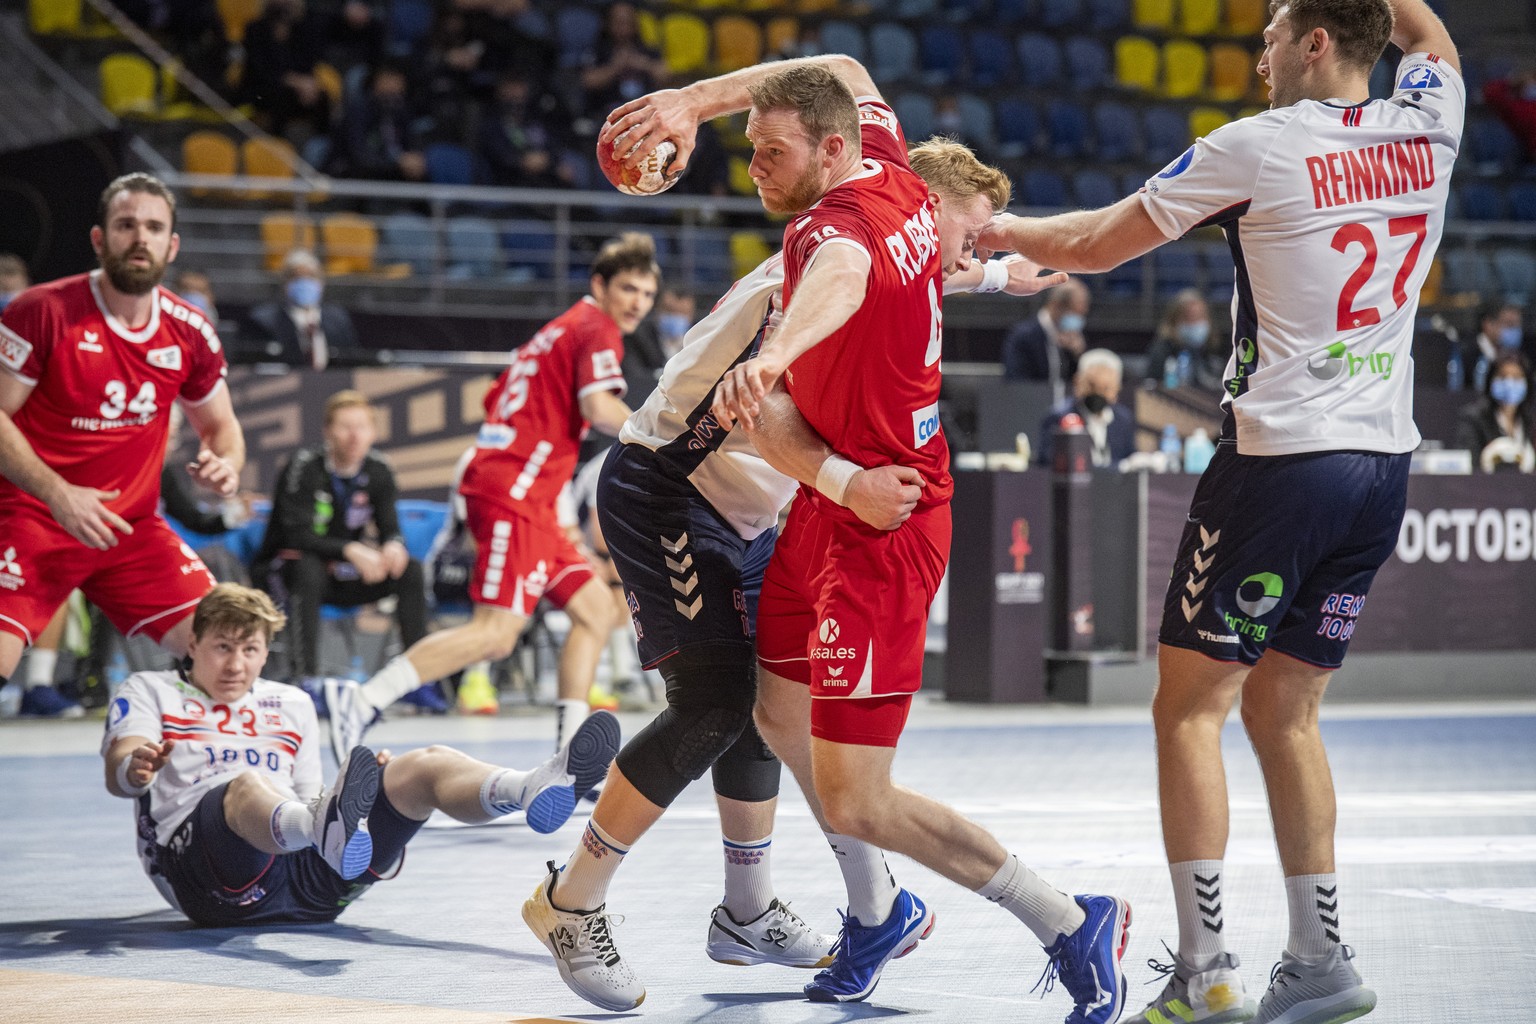 Switzerland&#039;s Lenny Rubin, centre, against Harald Reinkind, right, from Norway during the 27th Men&#039;s Handball World Championship 2021 Group E match betwen Switzerland and Norway in Madinat S ...